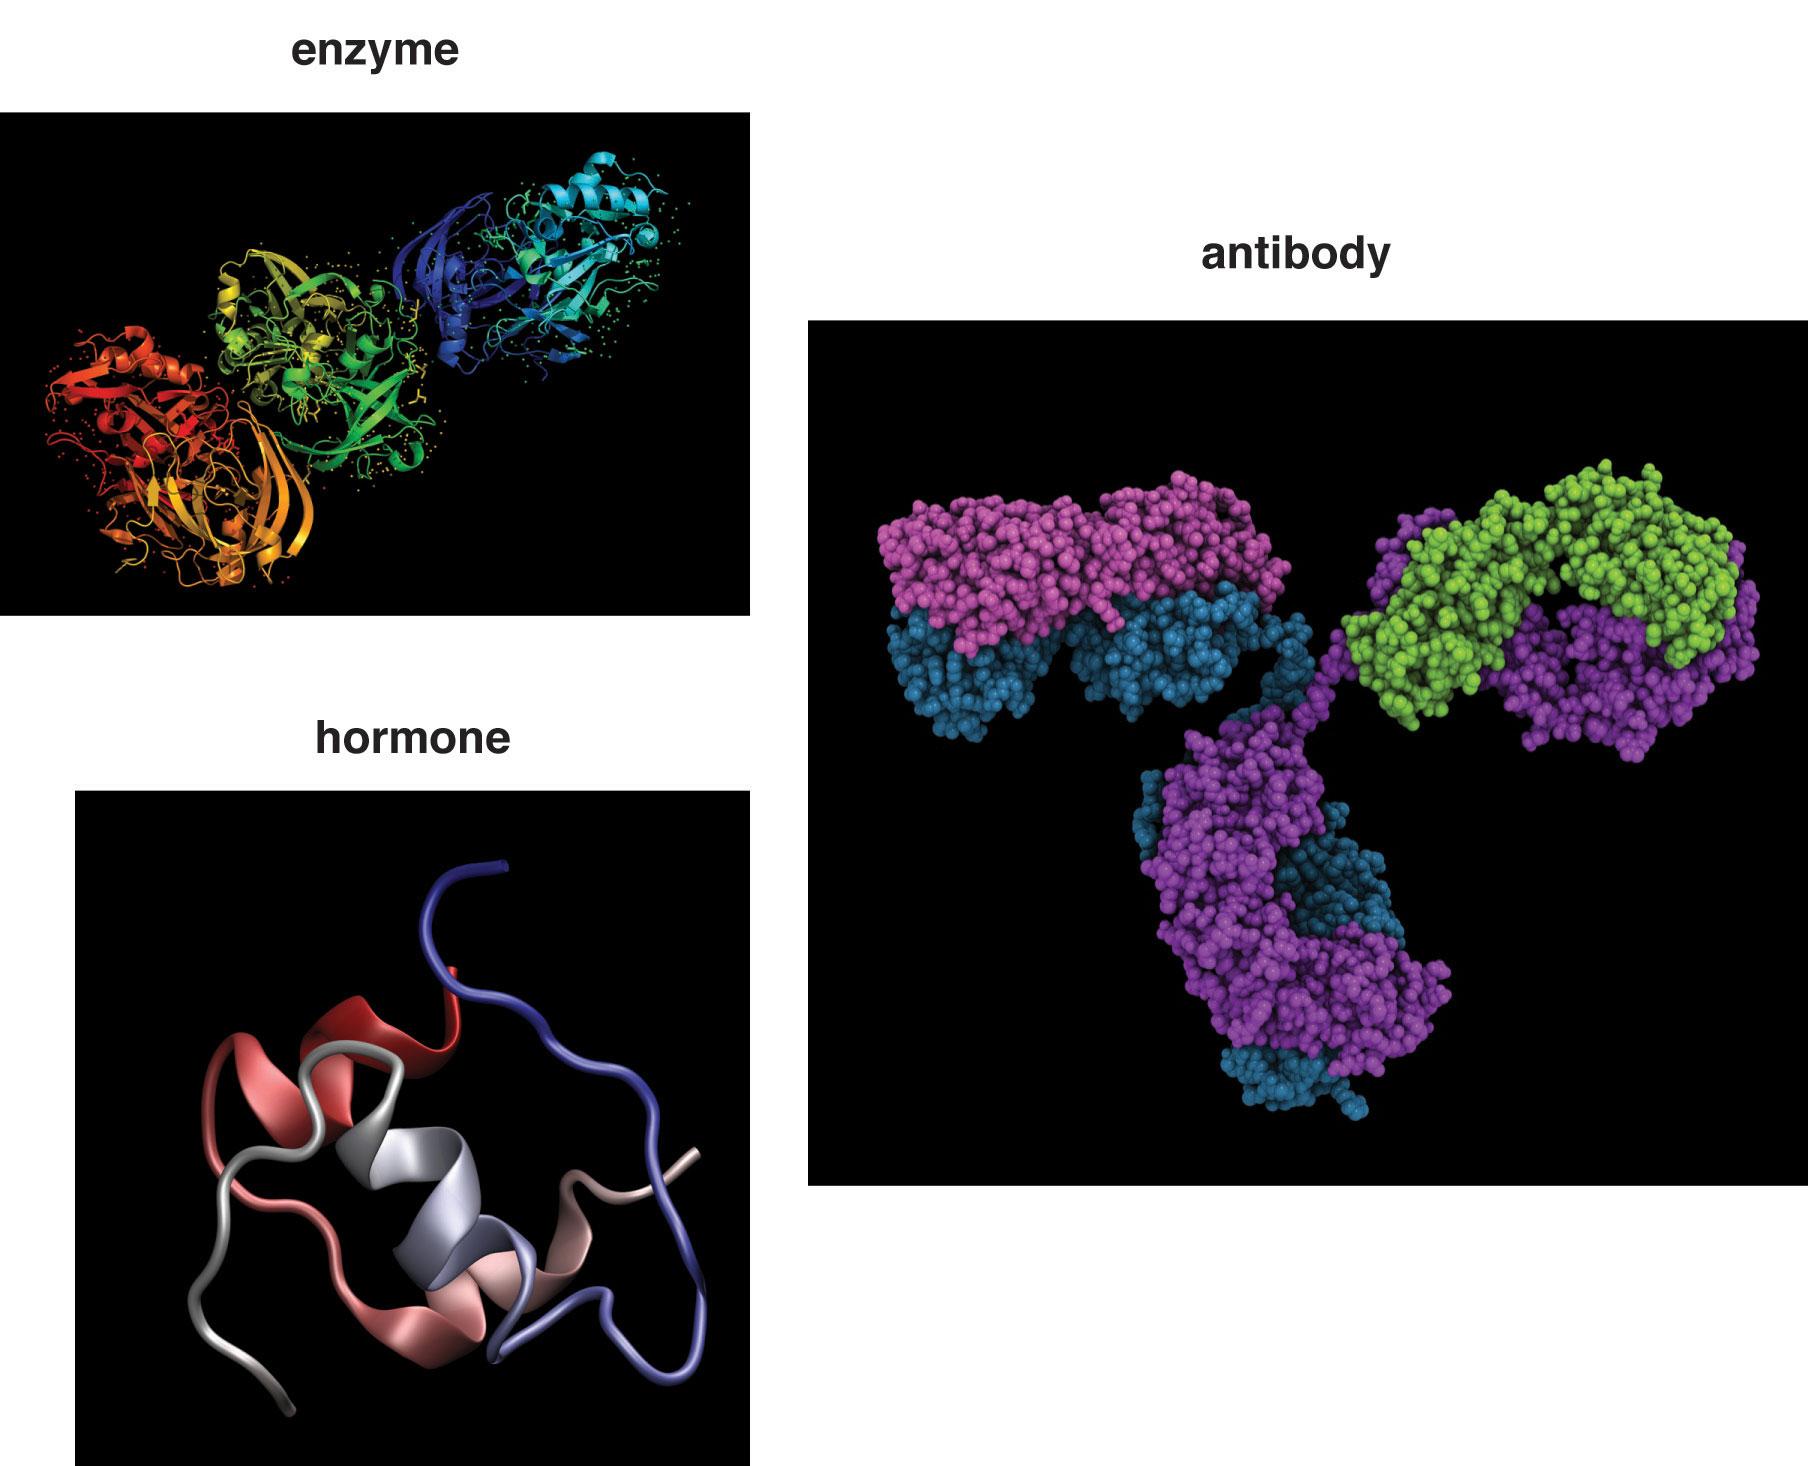 Three different proteins are shown to illustrate the different shapes of proteins. Enzymes which have 5 different colors of amino acid strands to form the linear shape of this protein. A hormone which is more simple in structure with 3 different colors of amino acid strands joining together to form this globular protein and antibodies which is the most complex with 4 different colors of amino acid strands coming together to form a 3-dimensional y-shaped structure.